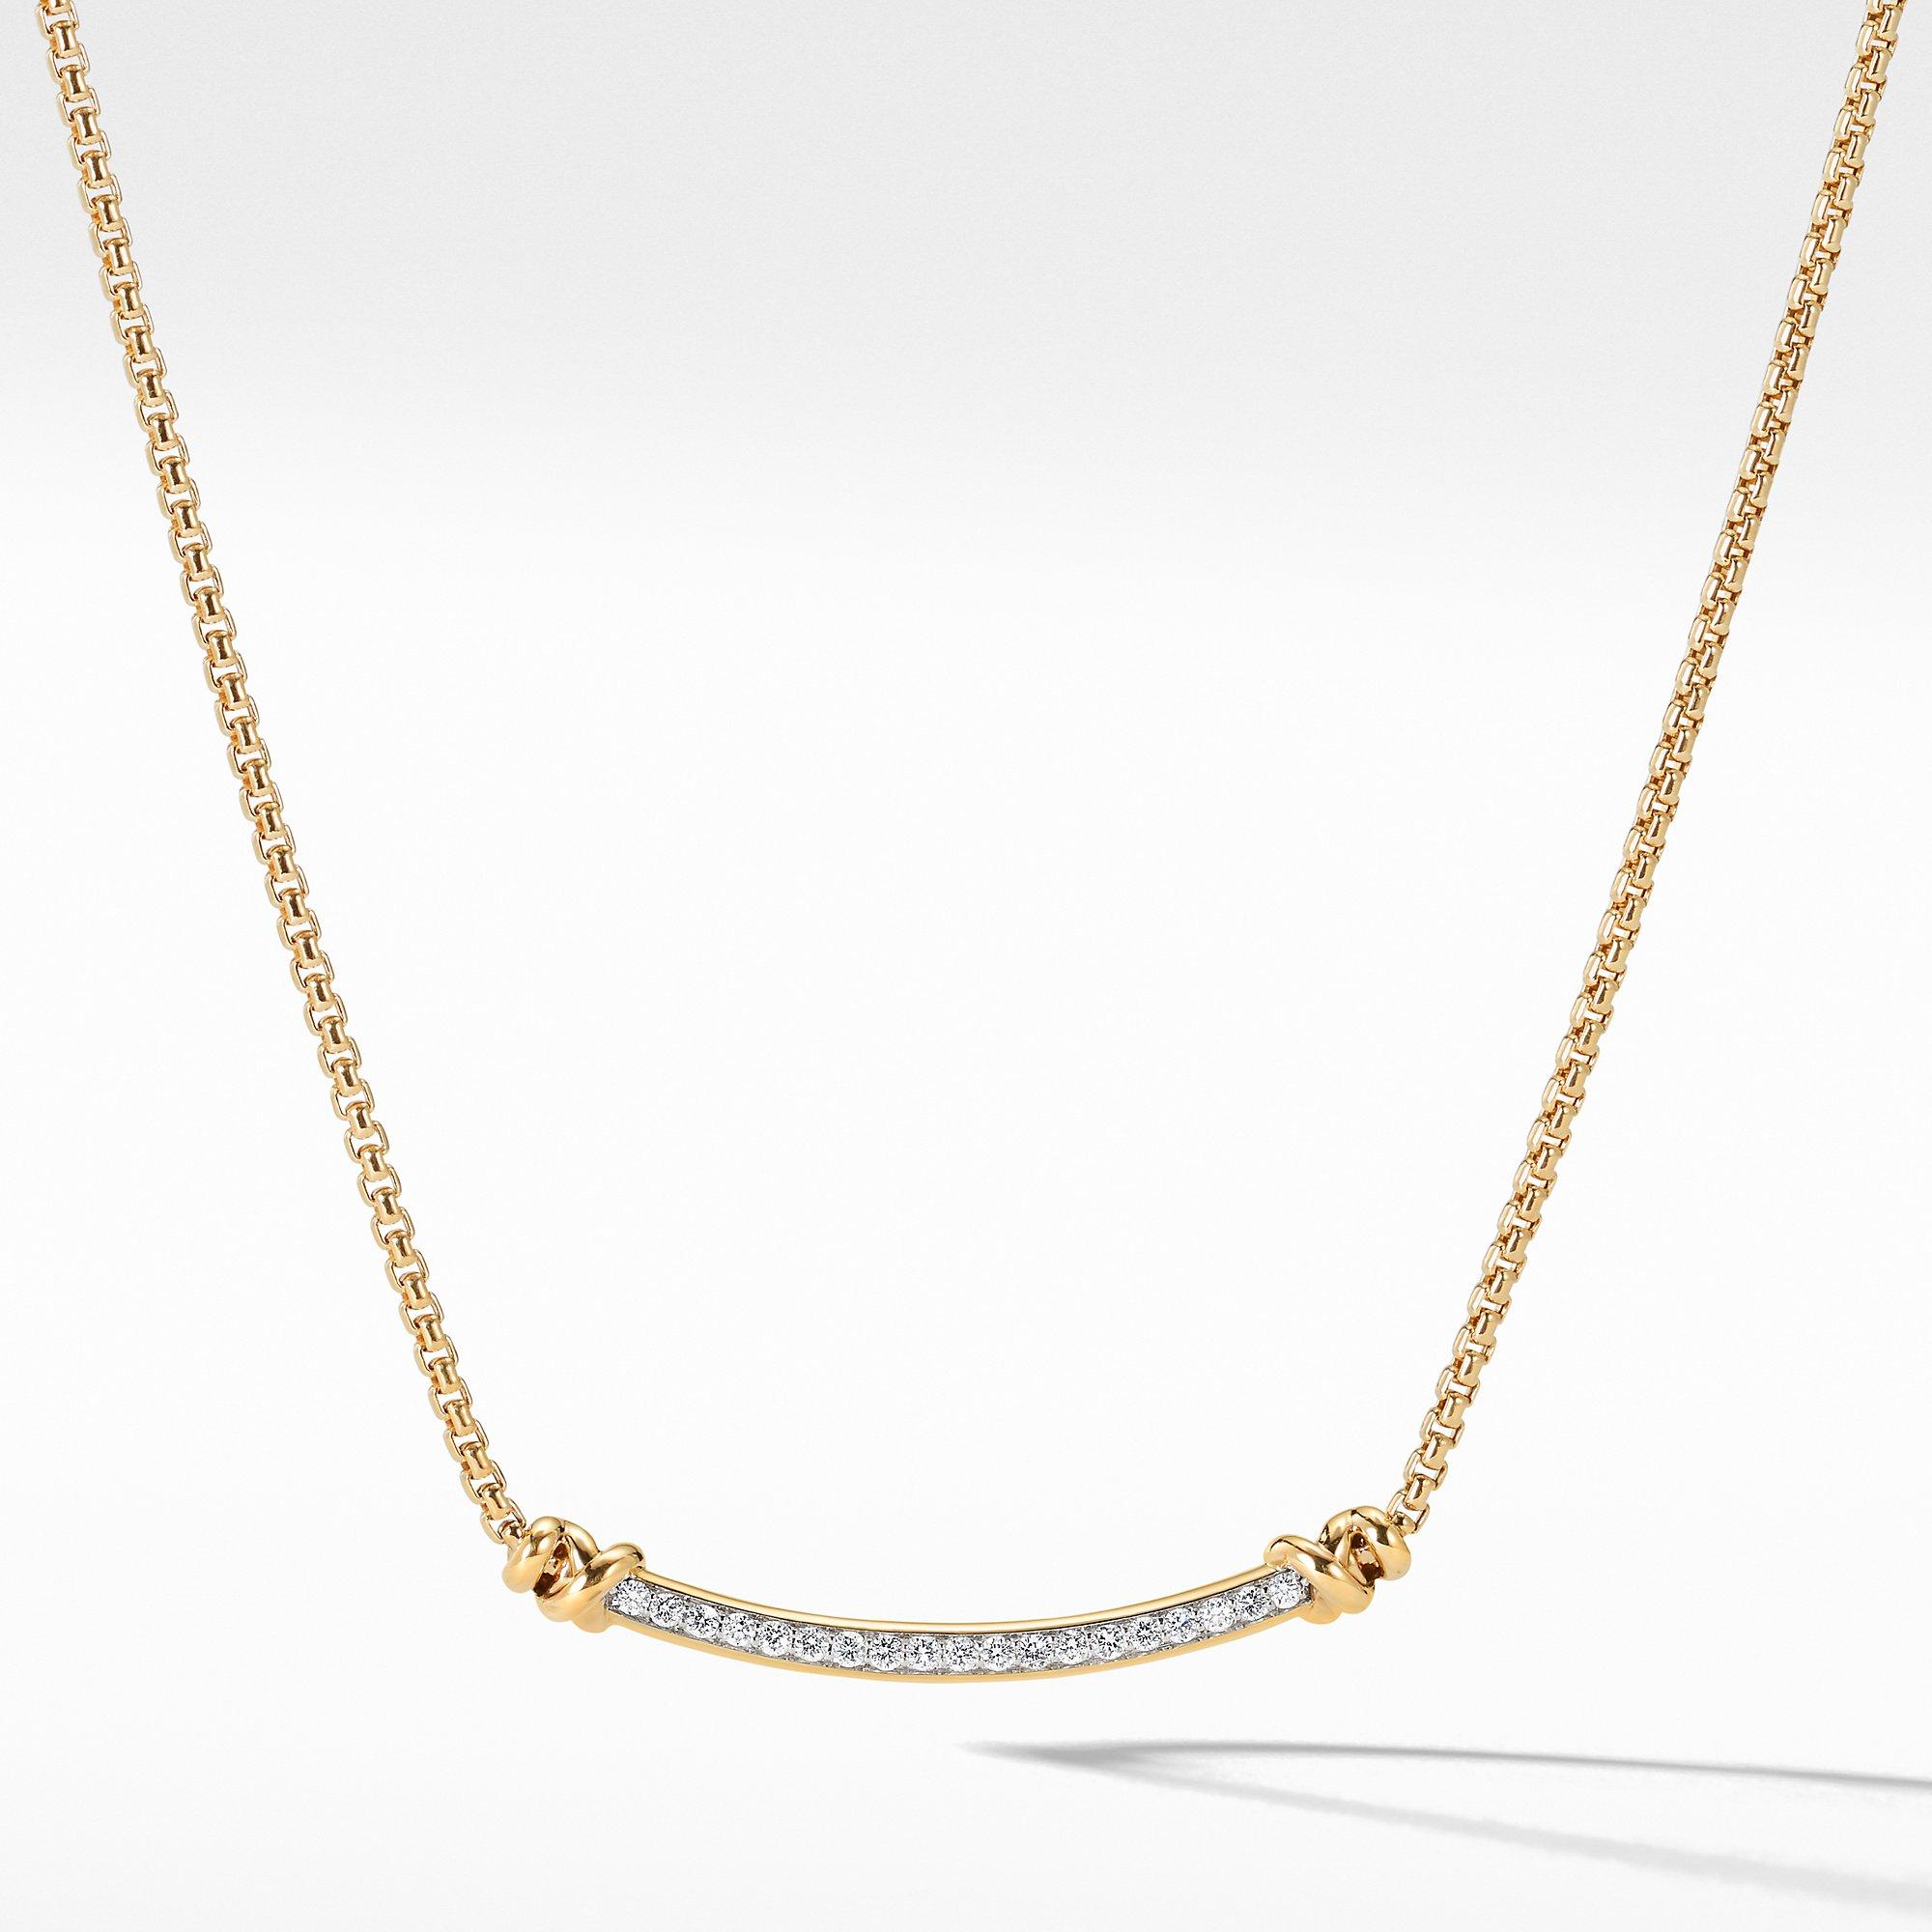 David Yurman | Petite Helena Station Necklace in 18K Yellow Gold with Diamonds | Front View